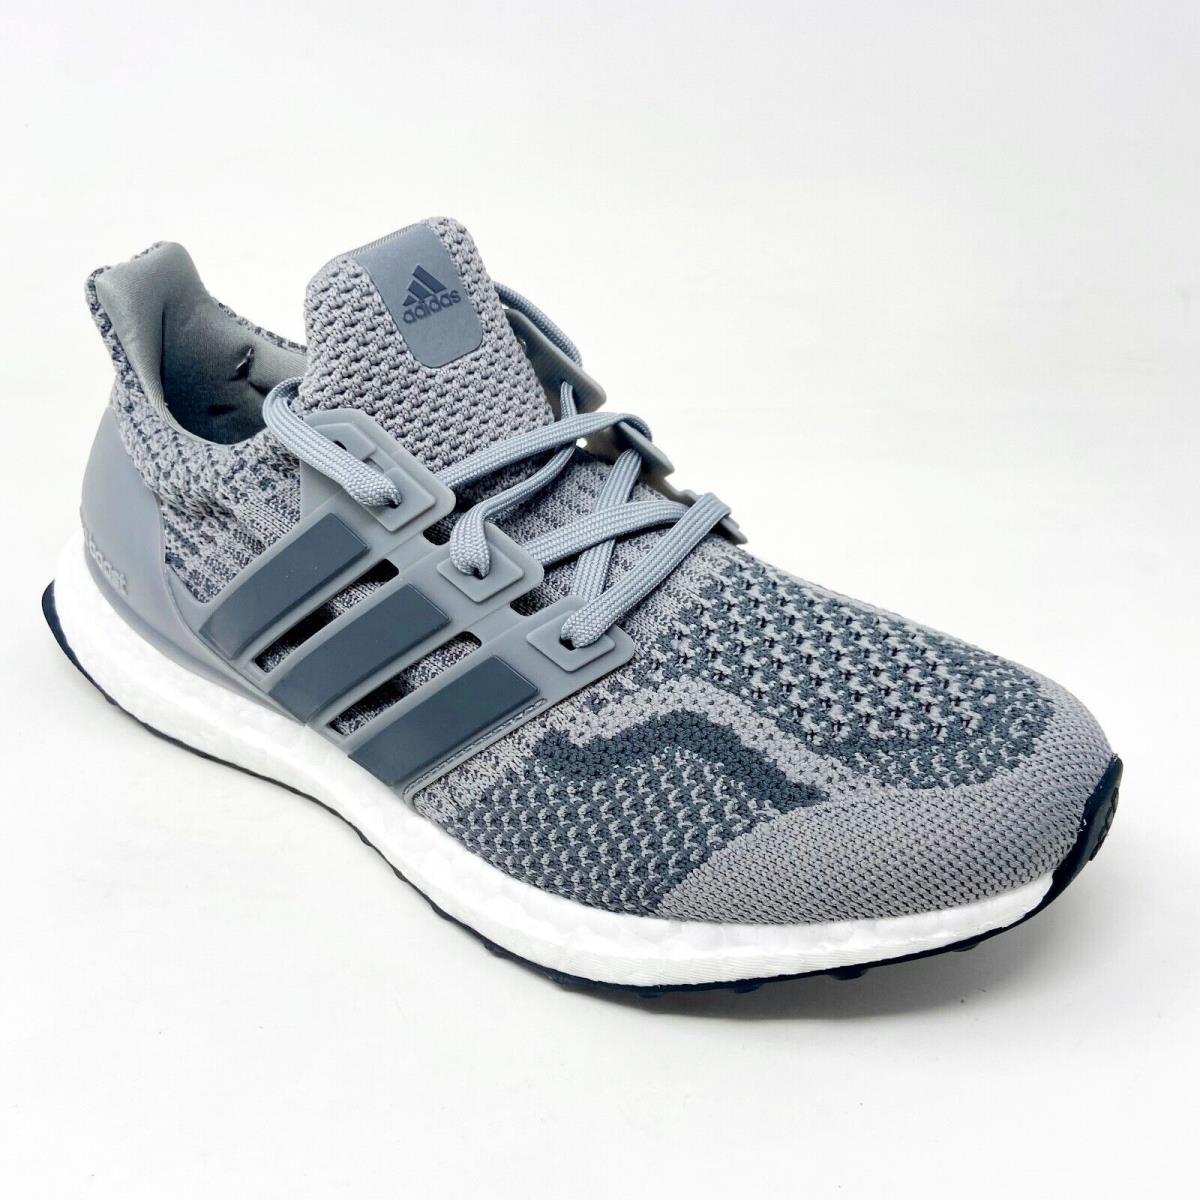 Adidas shoes UltraBoost DNA - Gray 0